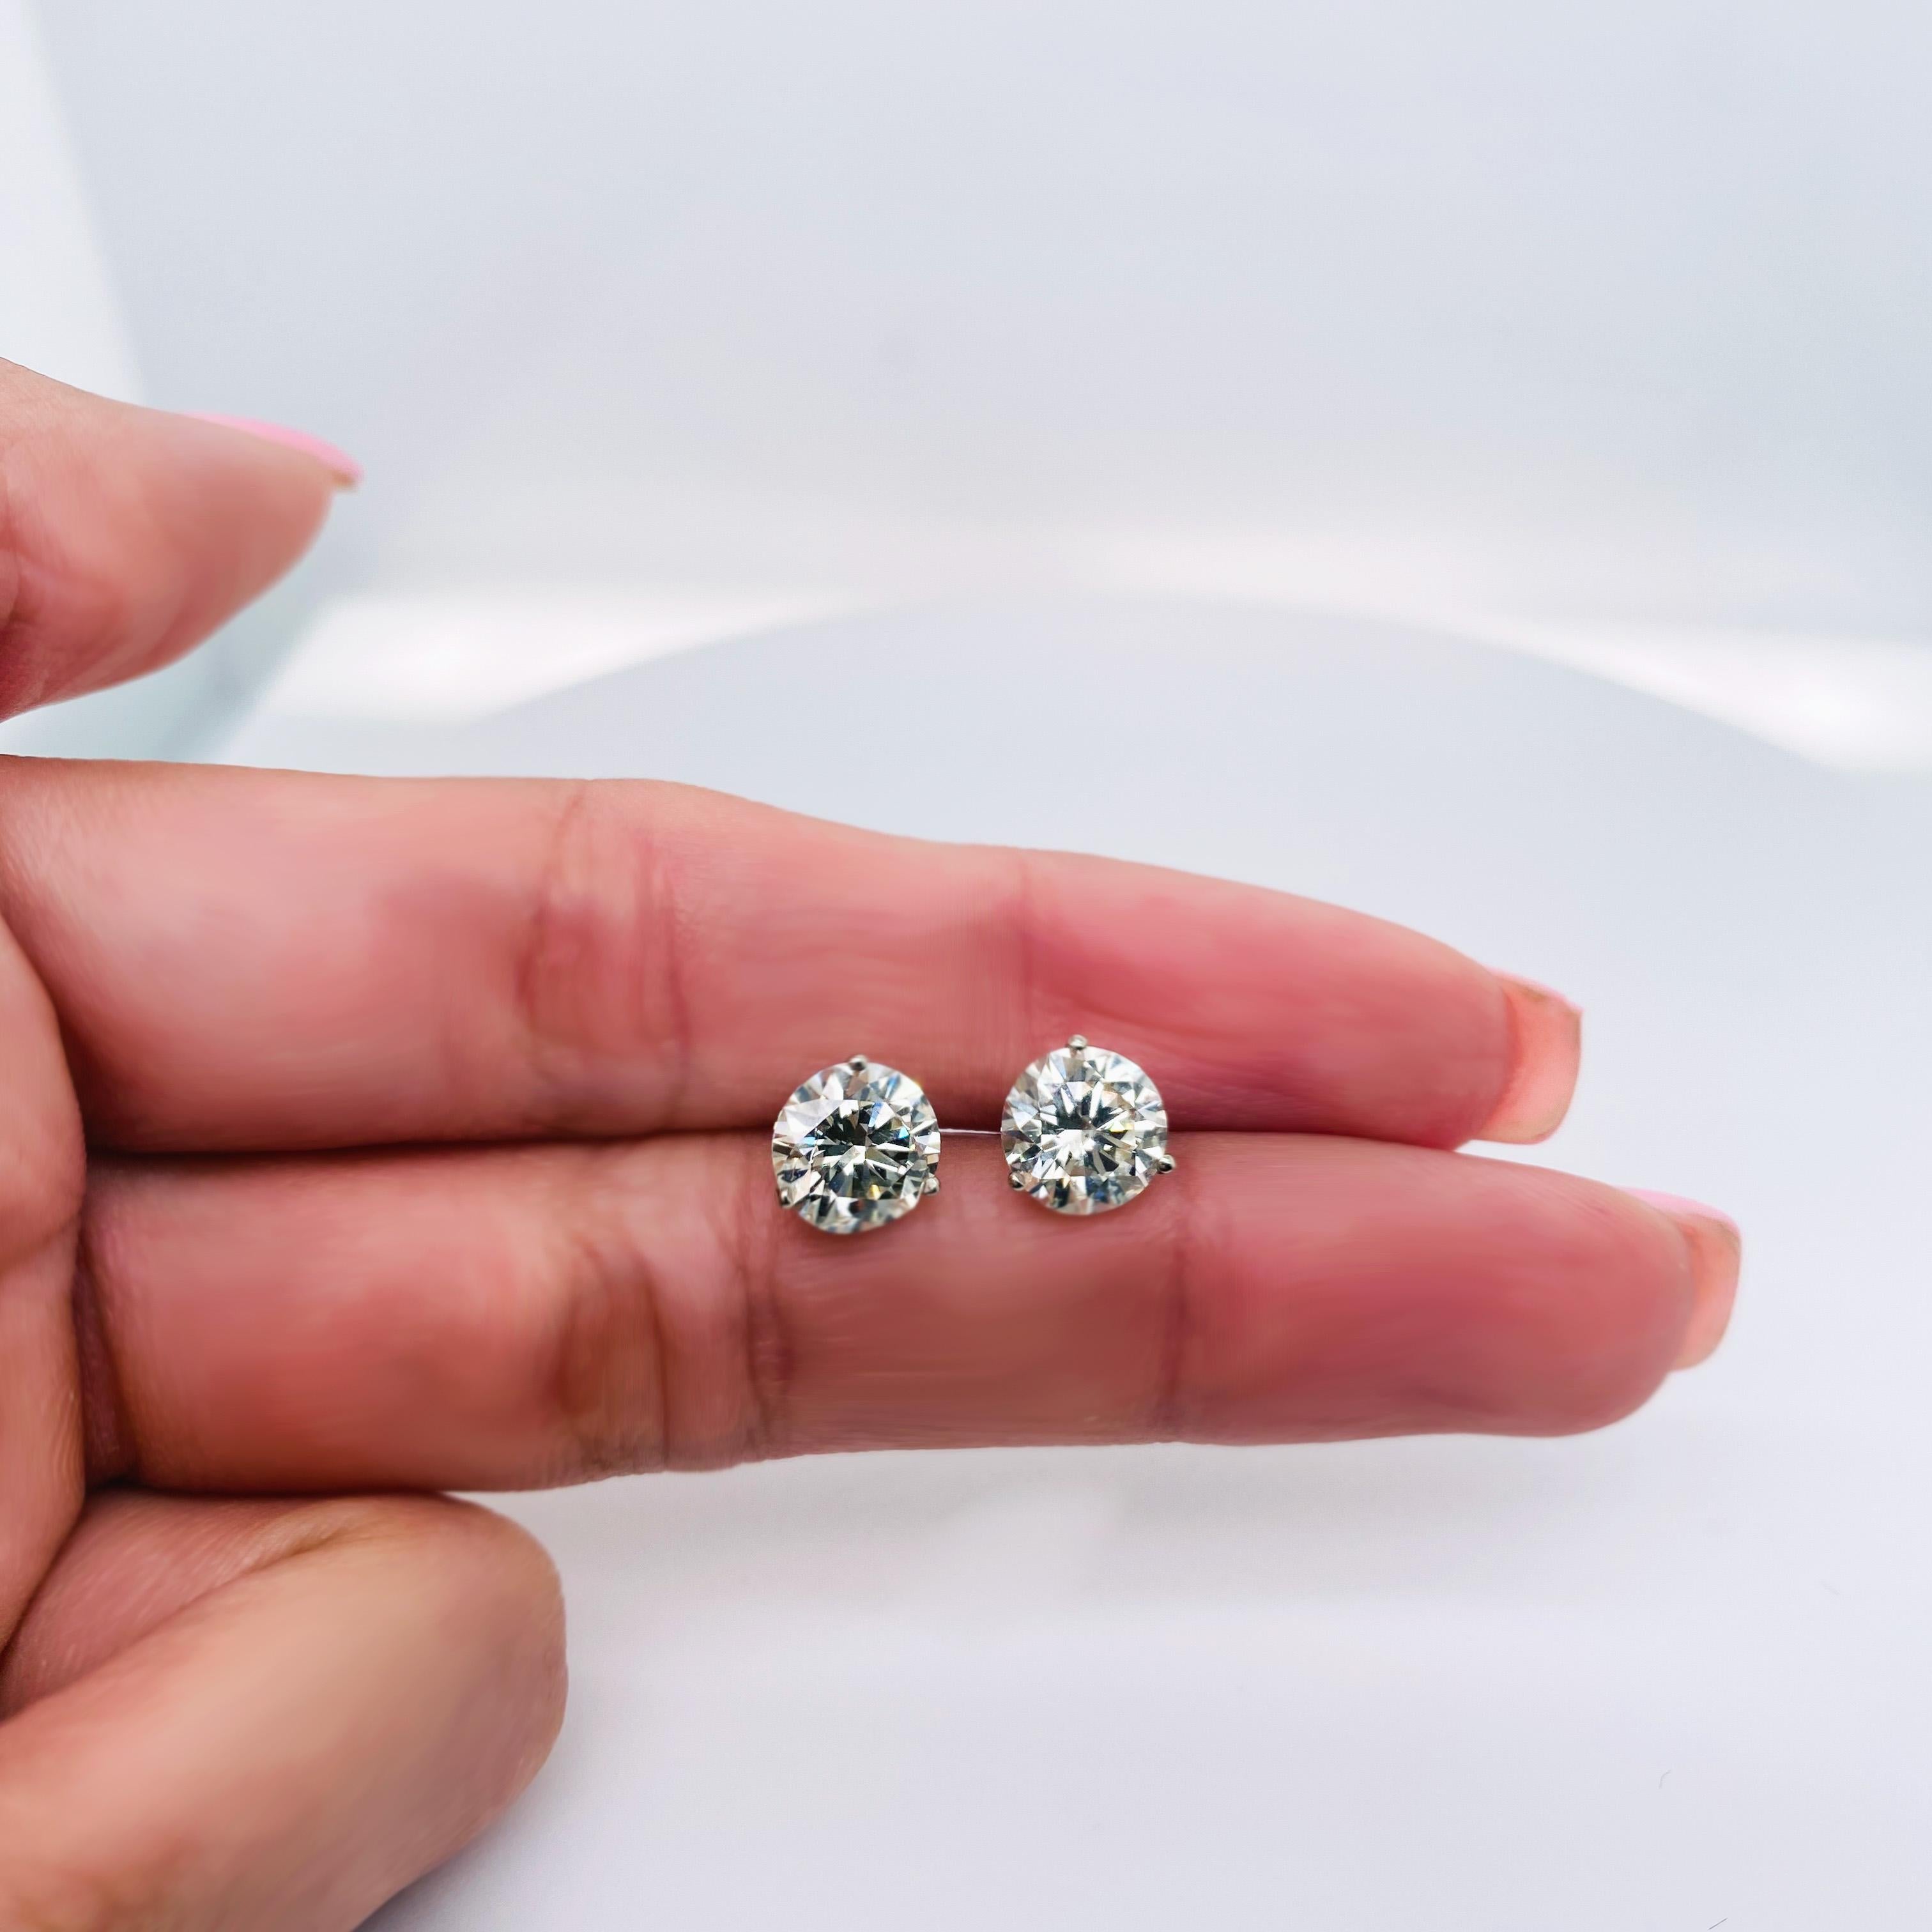 These stunning martini stud diamond earrings are perfect for any ear! Wear them alone or next to other favorite earrings. Martini studs are popular because they have a low profile close to the ear and still keep the stone proudly displayed for